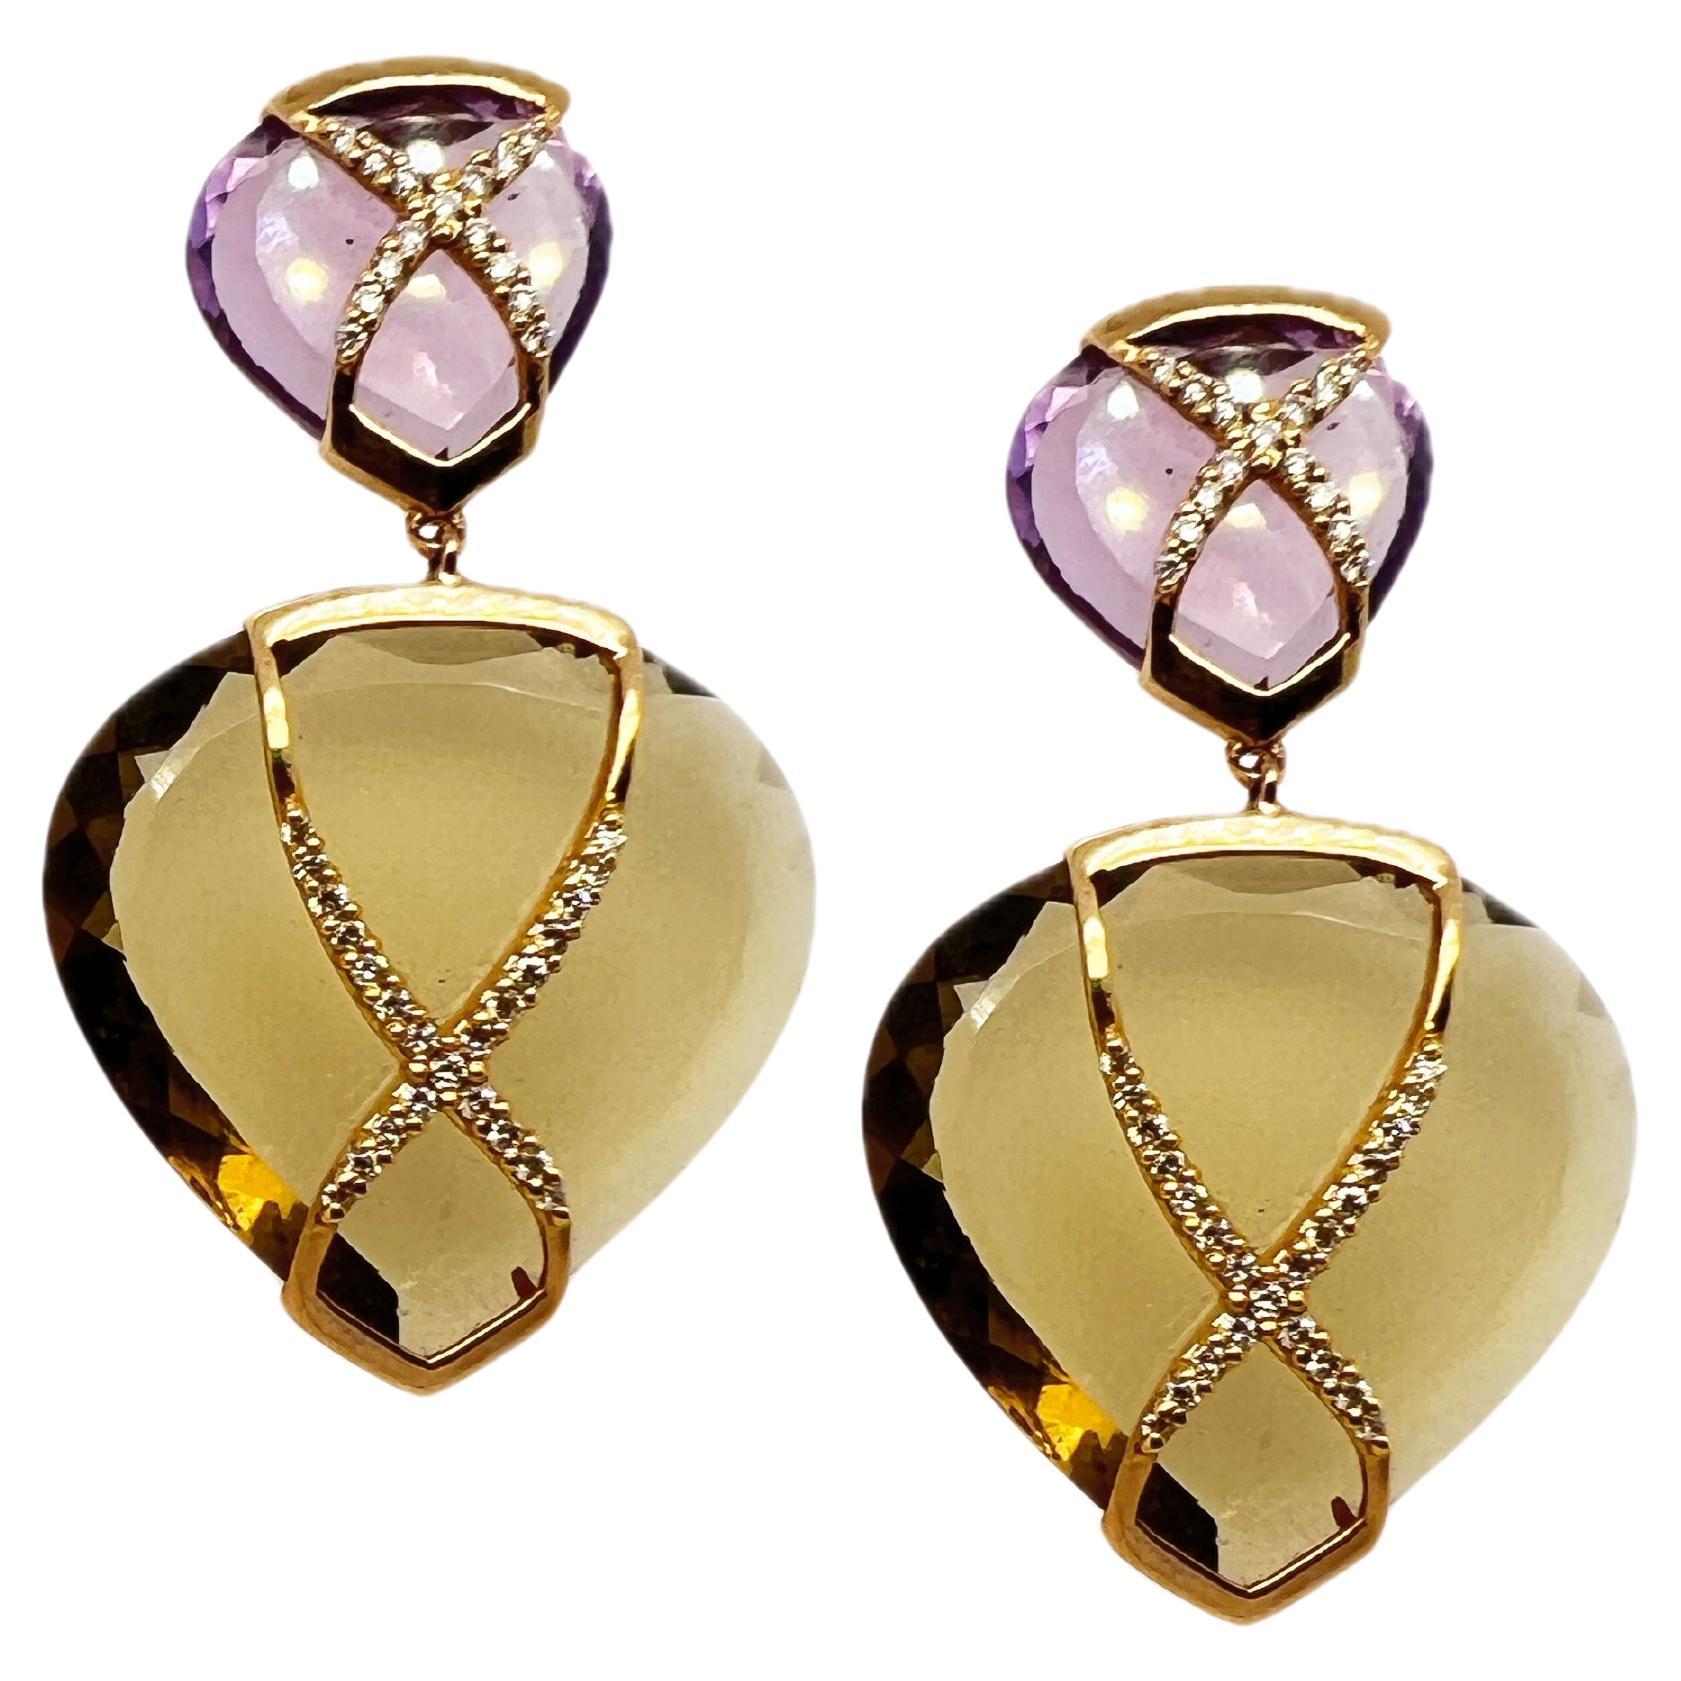 18kt Gold Earrings with amethyst and citrine quartz drops & diamonds